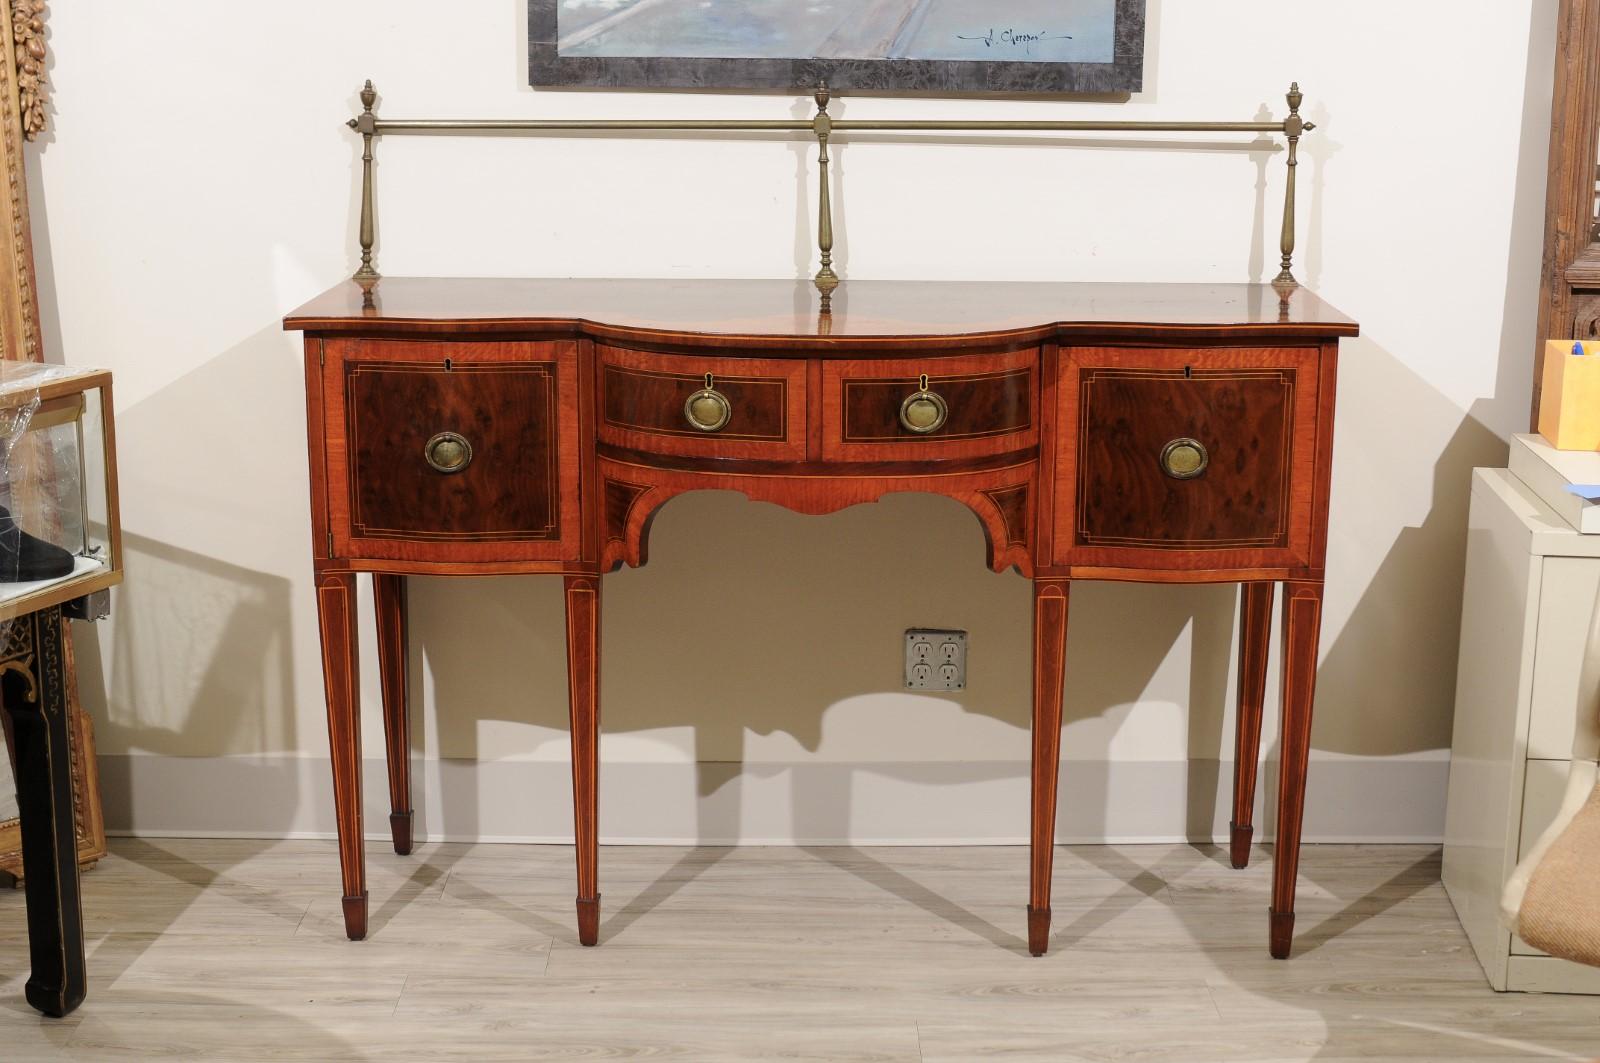 This magnificent sideboard is exceptional ! The size is perfect for large or small room
The piece has the original 13 inch brass back rail and beautiful marquetry inlay on the top. Notice the picture with the urn on top center. Lovely!!
The front